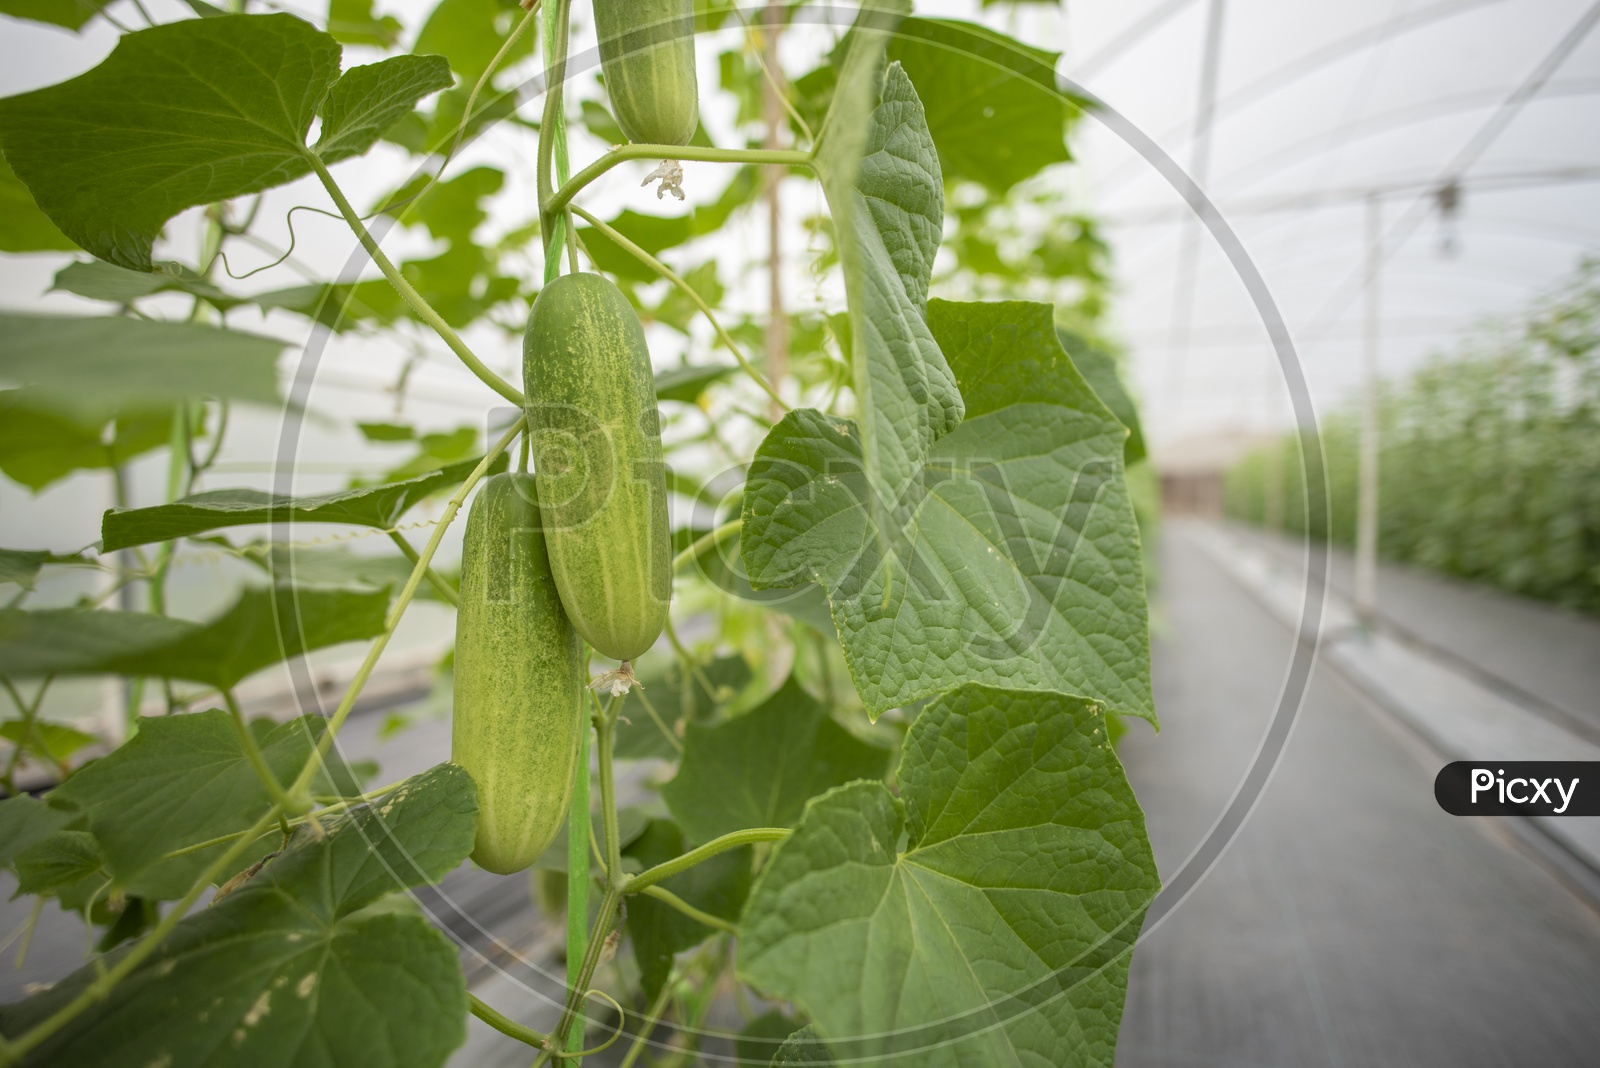 Cucumber Being Grown in Green Houses